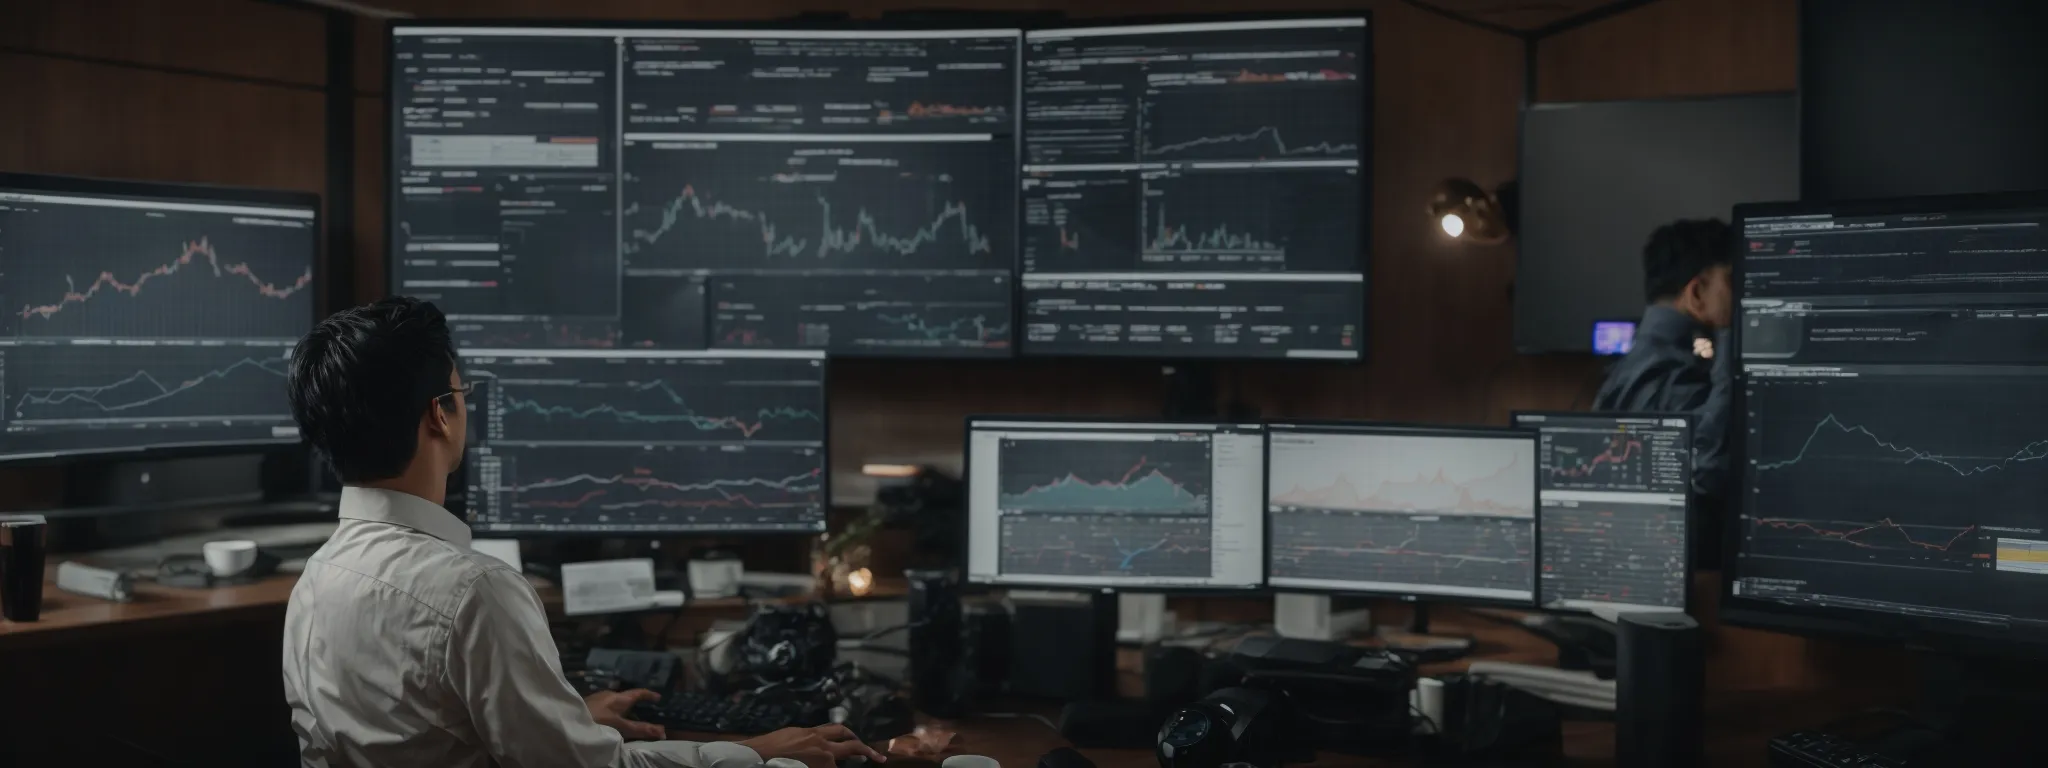 an seo expert analyzes a multi-layer dashboard displaying website traffic trends, seo metrics, and search engine positions on a large monitor in a modern office.